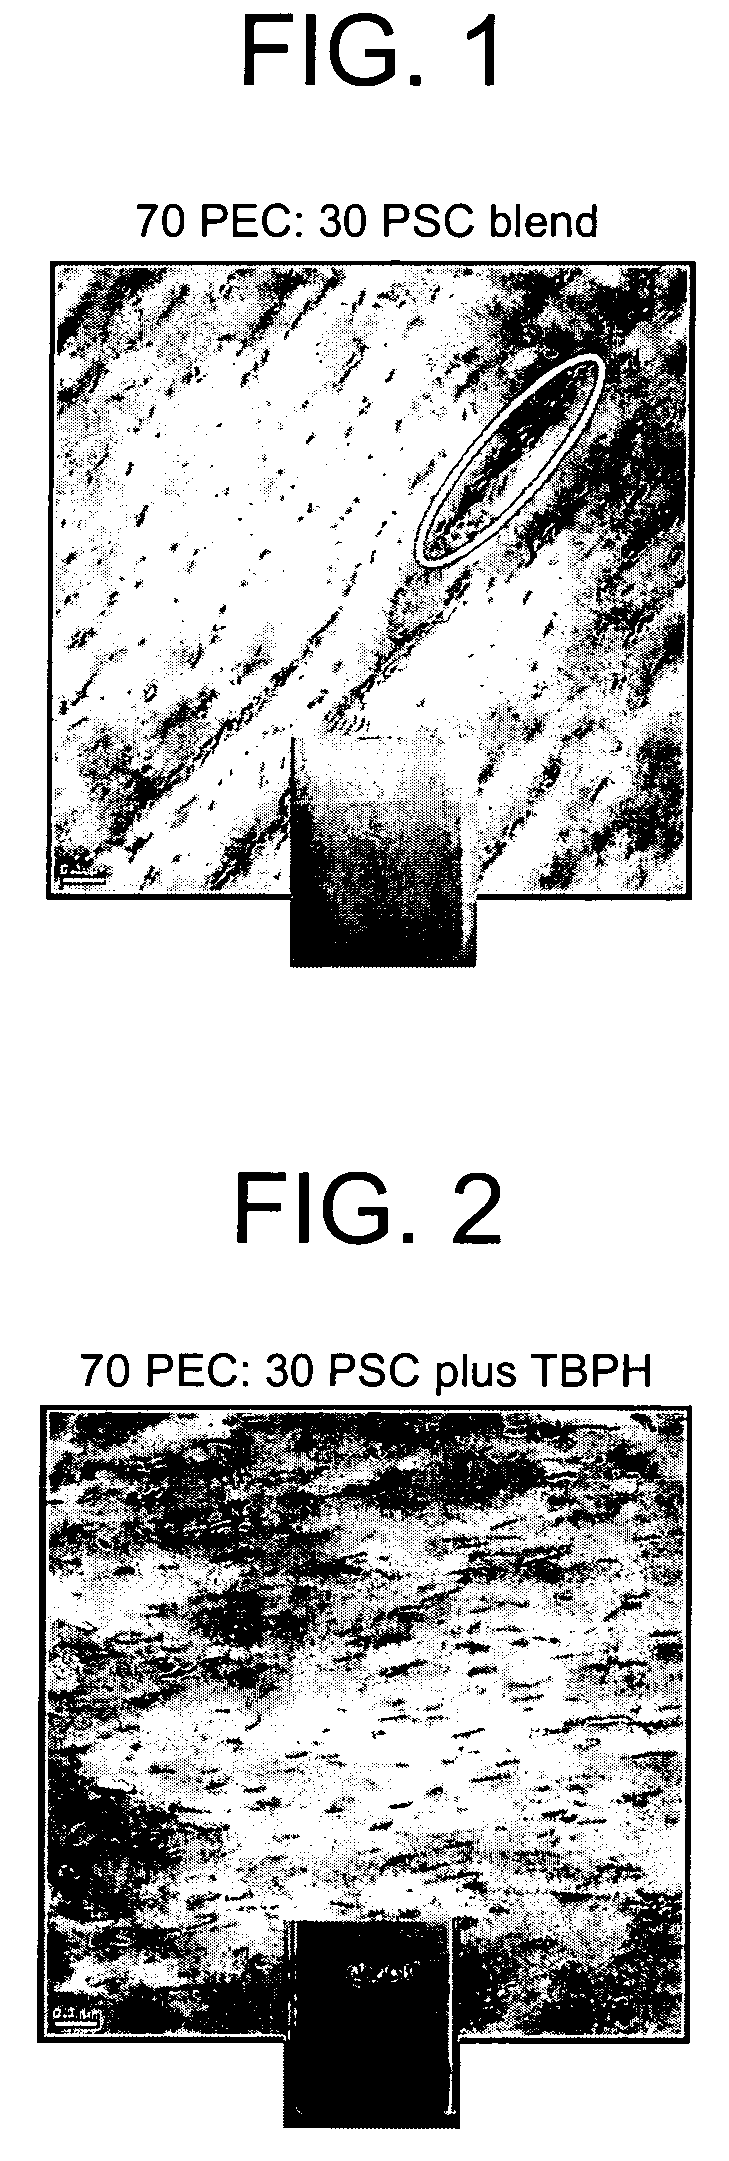 Transparent compositions, methods for the preparation thereof, and articles derived therefrom